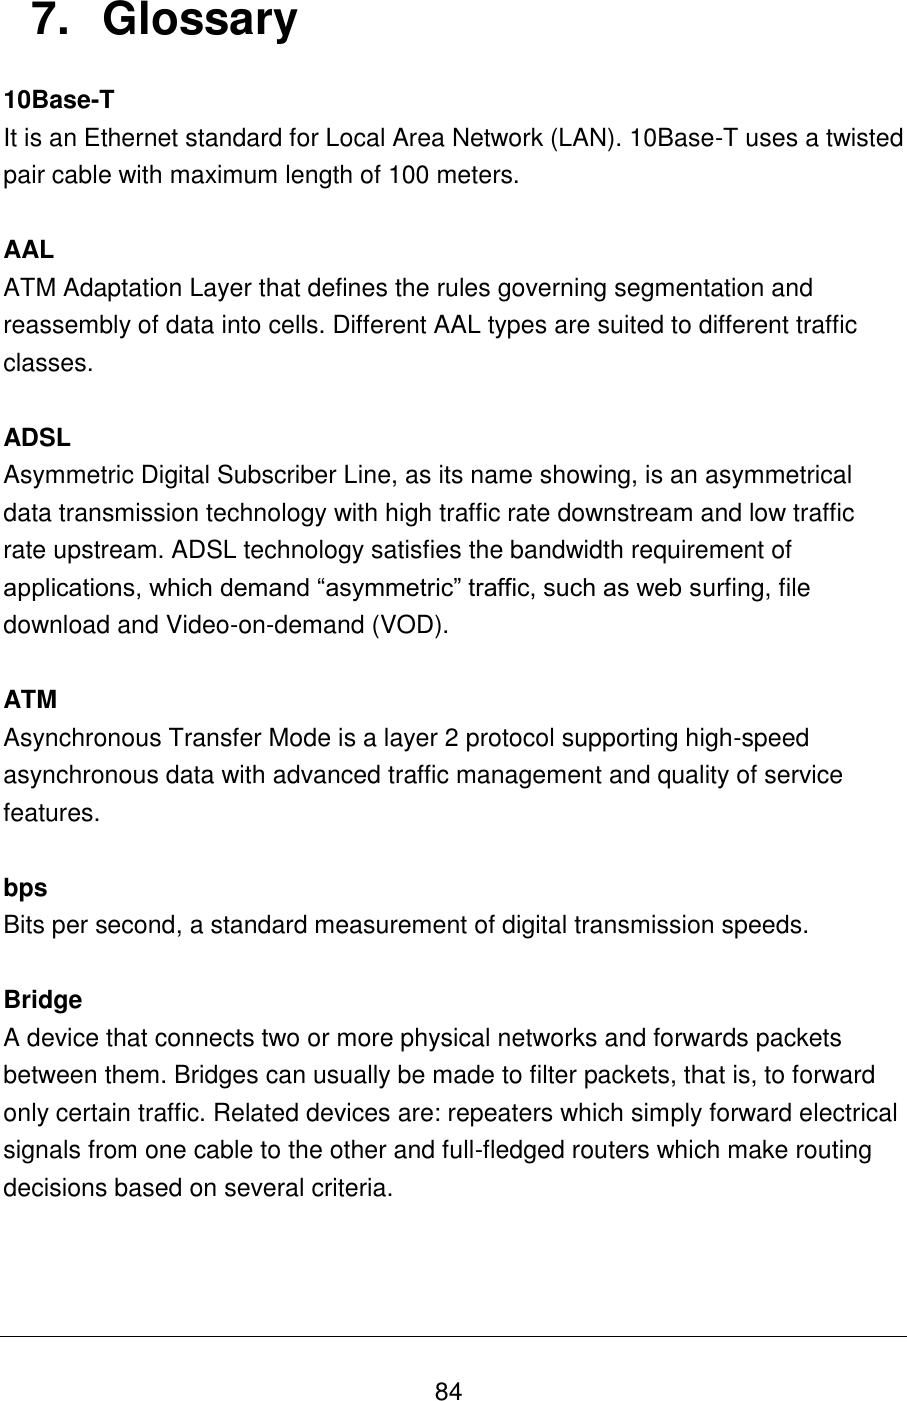   84 7.  Glossary 10Base-T It is an Ethernet standard for Local Area Network (LAN). 10Base-T uses a twisted pair cable with maximum length of 100 meters.  AAL ATM Adaptation Layer that defines the rules governing segmentation and reassembly of data into cells. Different AAL types are suited to different traffic classes.  ADSL Asymmetric Digital Subscriber Line, as its name showing, is an asymmetrical data transmission technology with high traffic rate downstream and low traffic rate upstream. ADSL technology satisfies the bandwidth requirement of applications, which demand “asymmetric” traffic, such as web surfing, file download and Video-on-demand (VOD).  ATM  Asynchronous Transfer Mode is a layer 2 protocol supporting high-speed asynchronous data with advanced traffic management and quality of service features.  bps Bits per second, a standard measurement of digital transmission speeds.  Bridge A device that connects two or more physical networks and forwards packets between them. Bridges can usually be made to filter packets, that is, to forward only certain traffic. Related devices are: repeaters which simply forward electrical signals from one cable to the other and full-fledged routers which make routing decisions based on several criteria.    